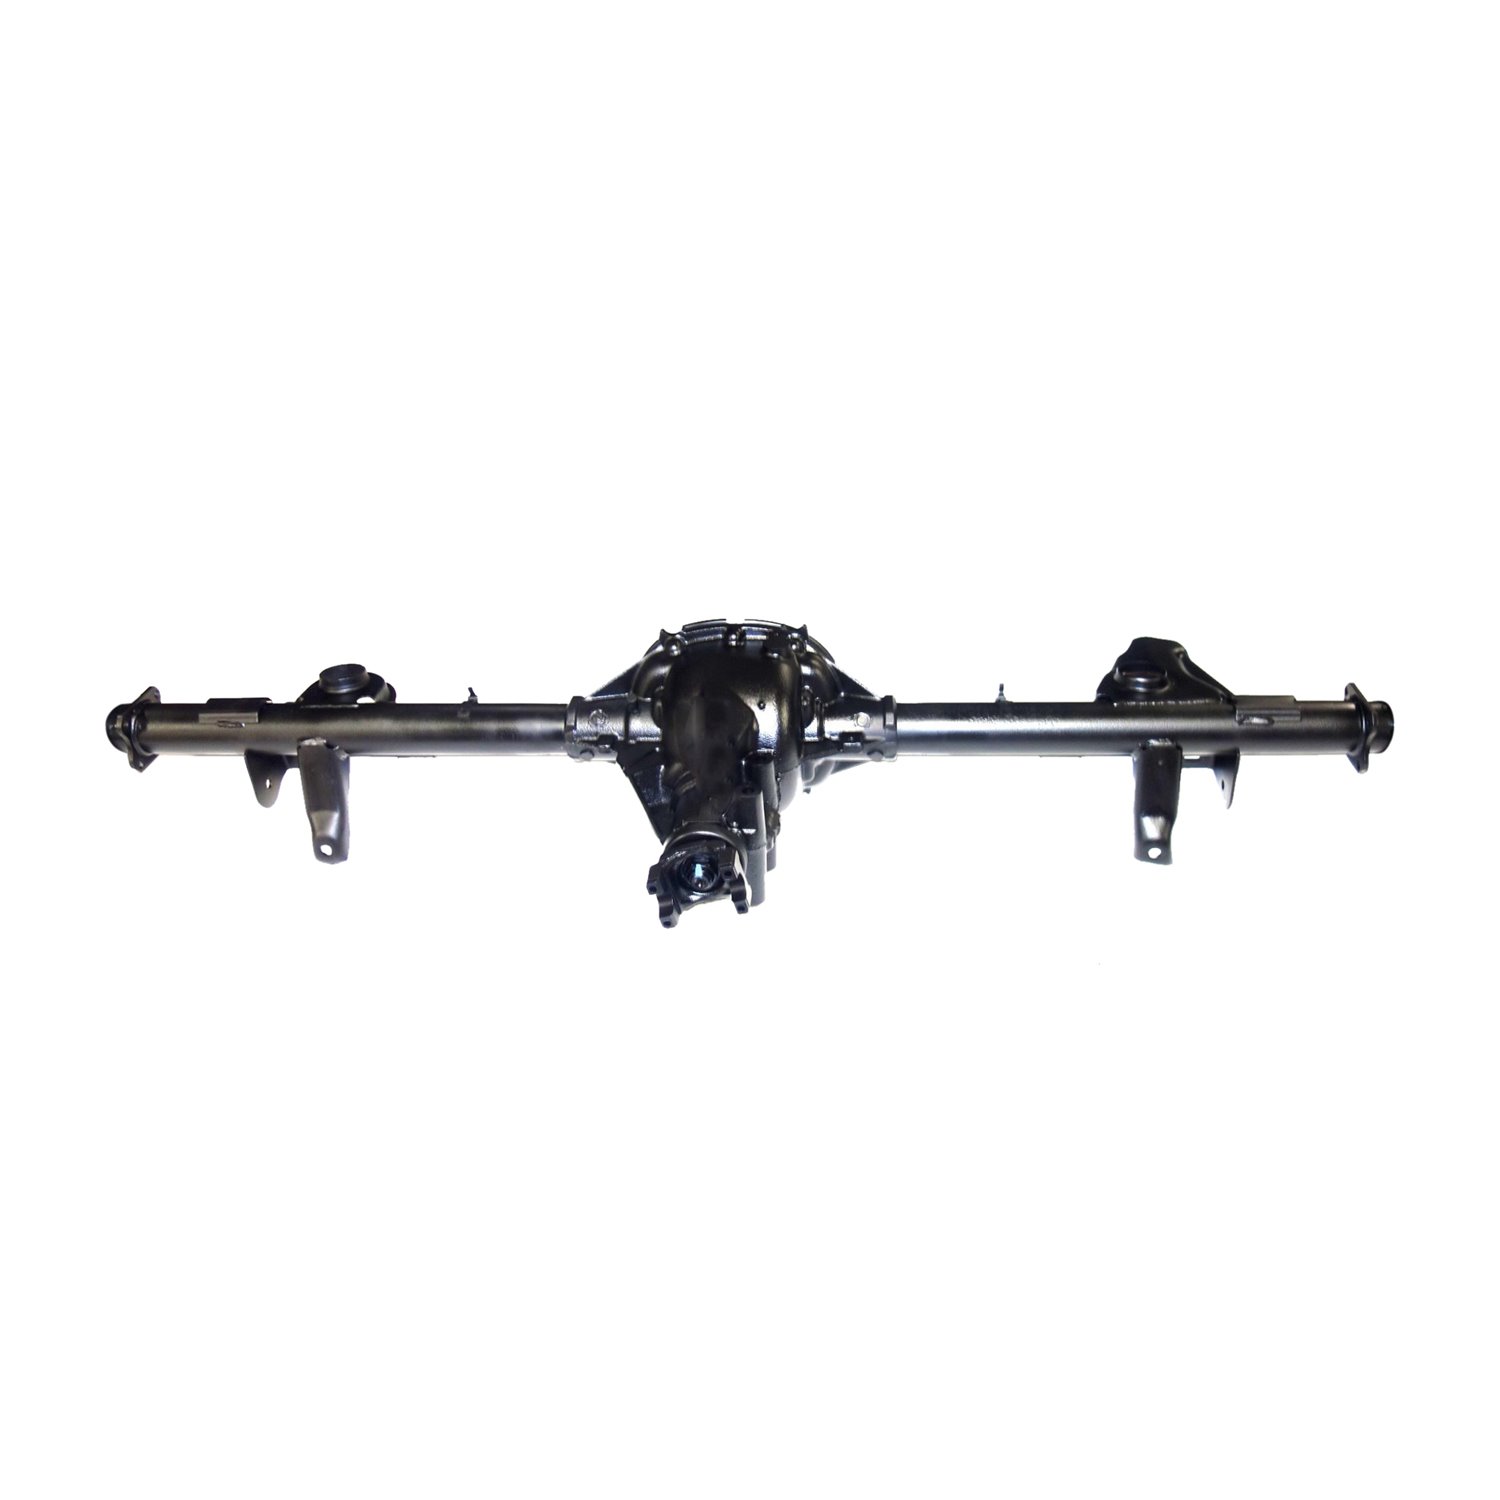 Remanufactured Axle Assy for GM 7.5" 95-97 Chevy S10 Blazer & S15 Jimmy, 3.73 , 4x4